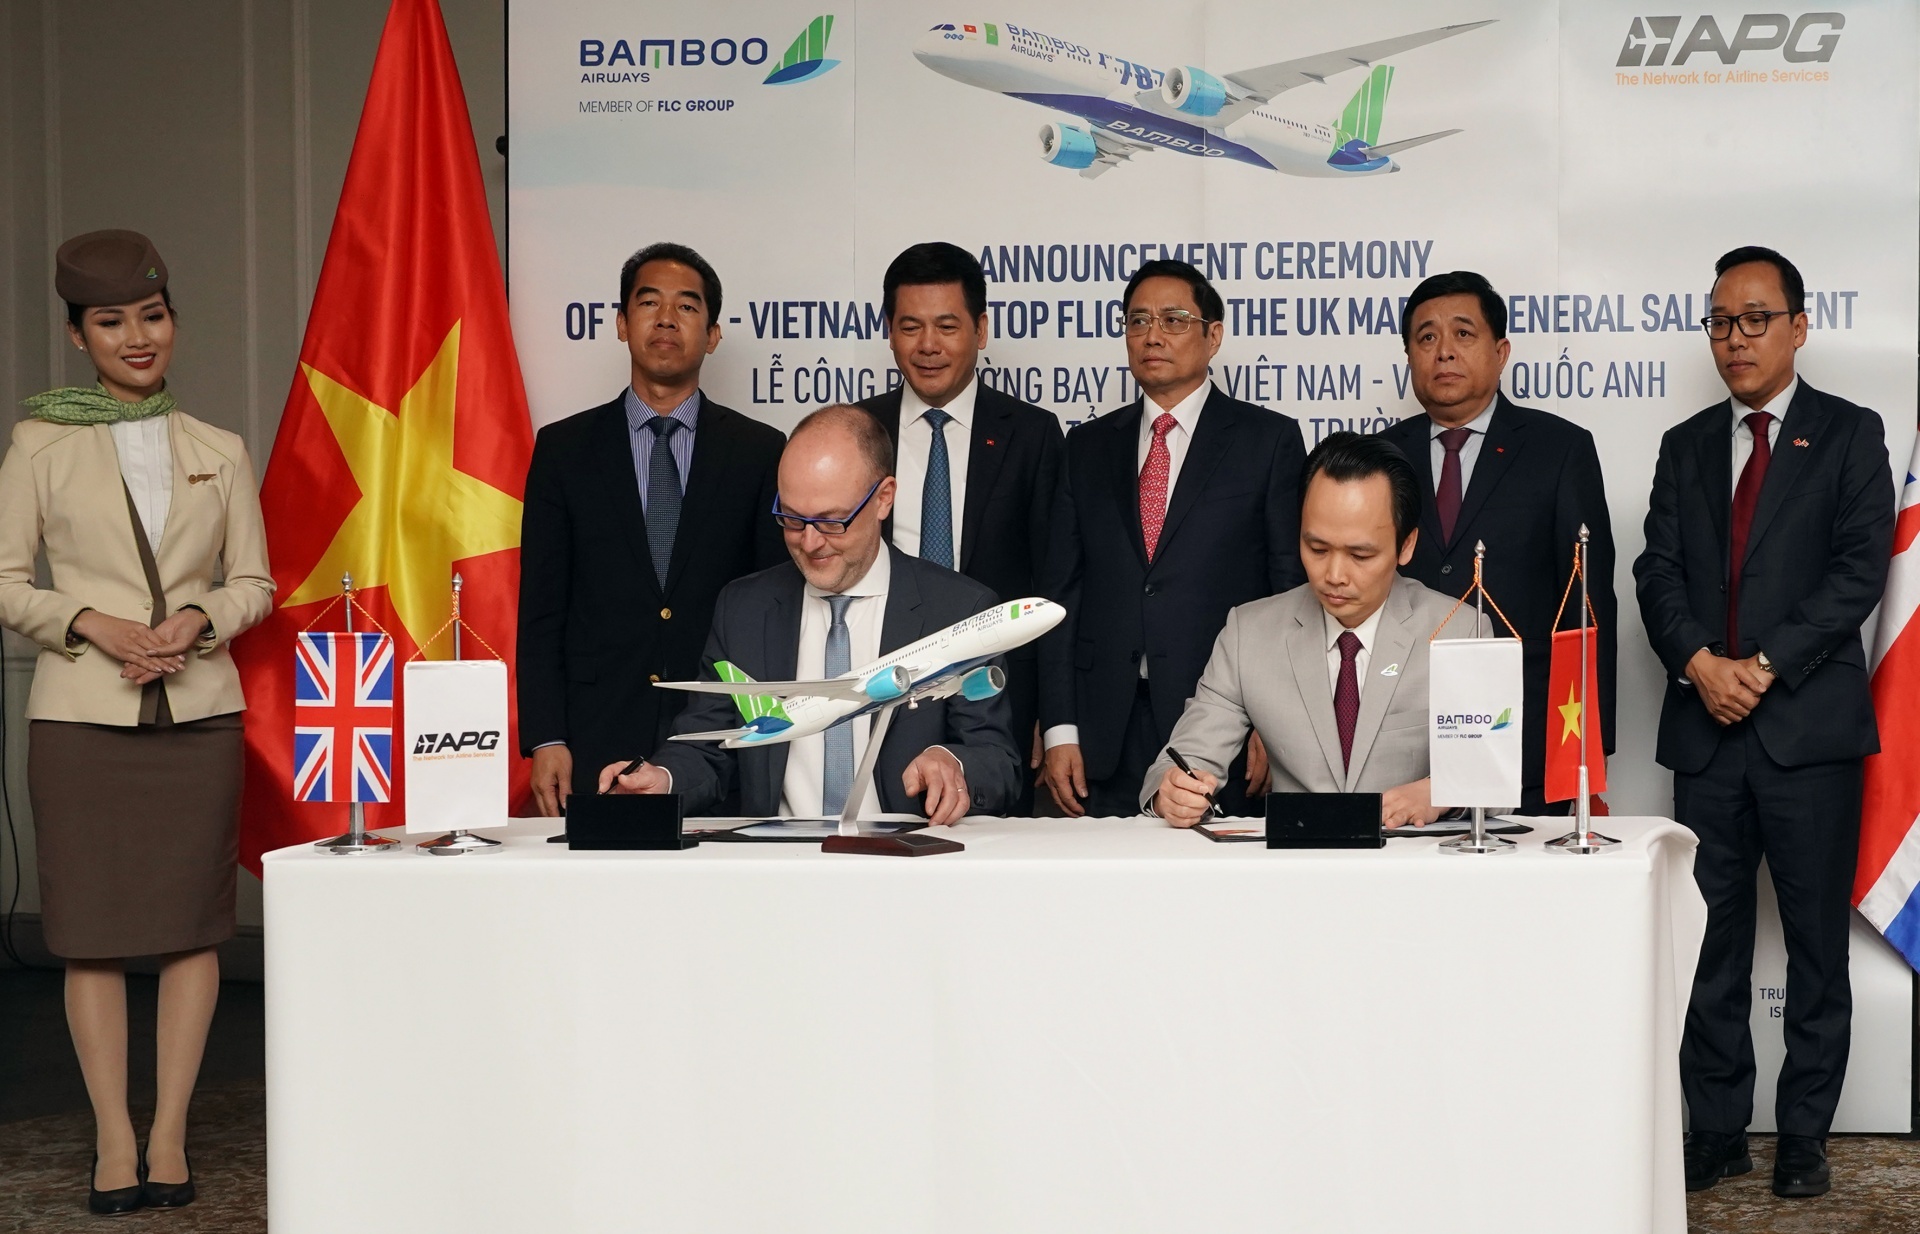 Bamboo Airways inaugurates Vietnam-UK nonstop route and general sales agent in UK